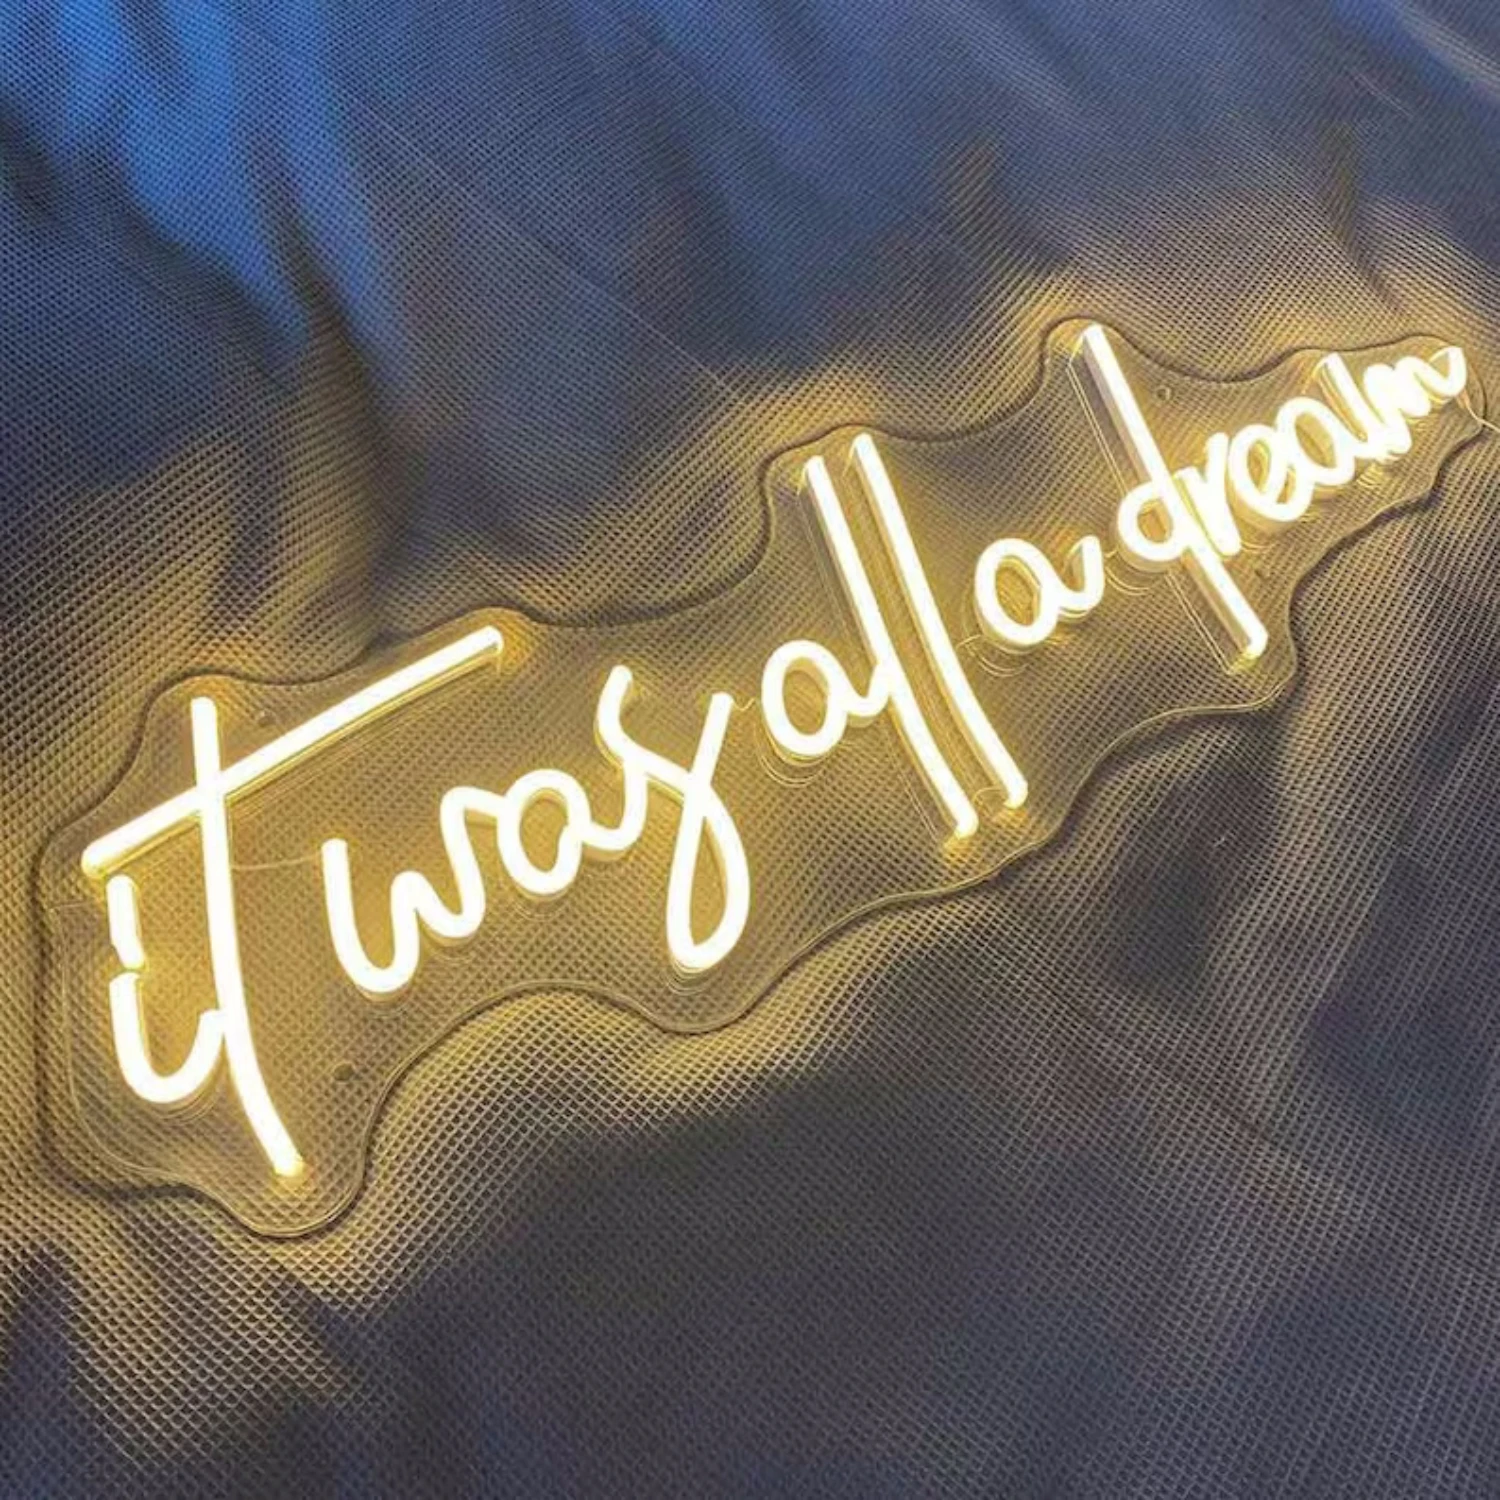 It Was All A Dream Neon LED Sign Home Bedroom Living Room Wall Decoration Atmosphere Light Birthday Gift Party Bar Space Design 12w uv purple light bulb e27 glow in the dark party supplies party lamp light bar fluorescent atmosphere decoration bulb